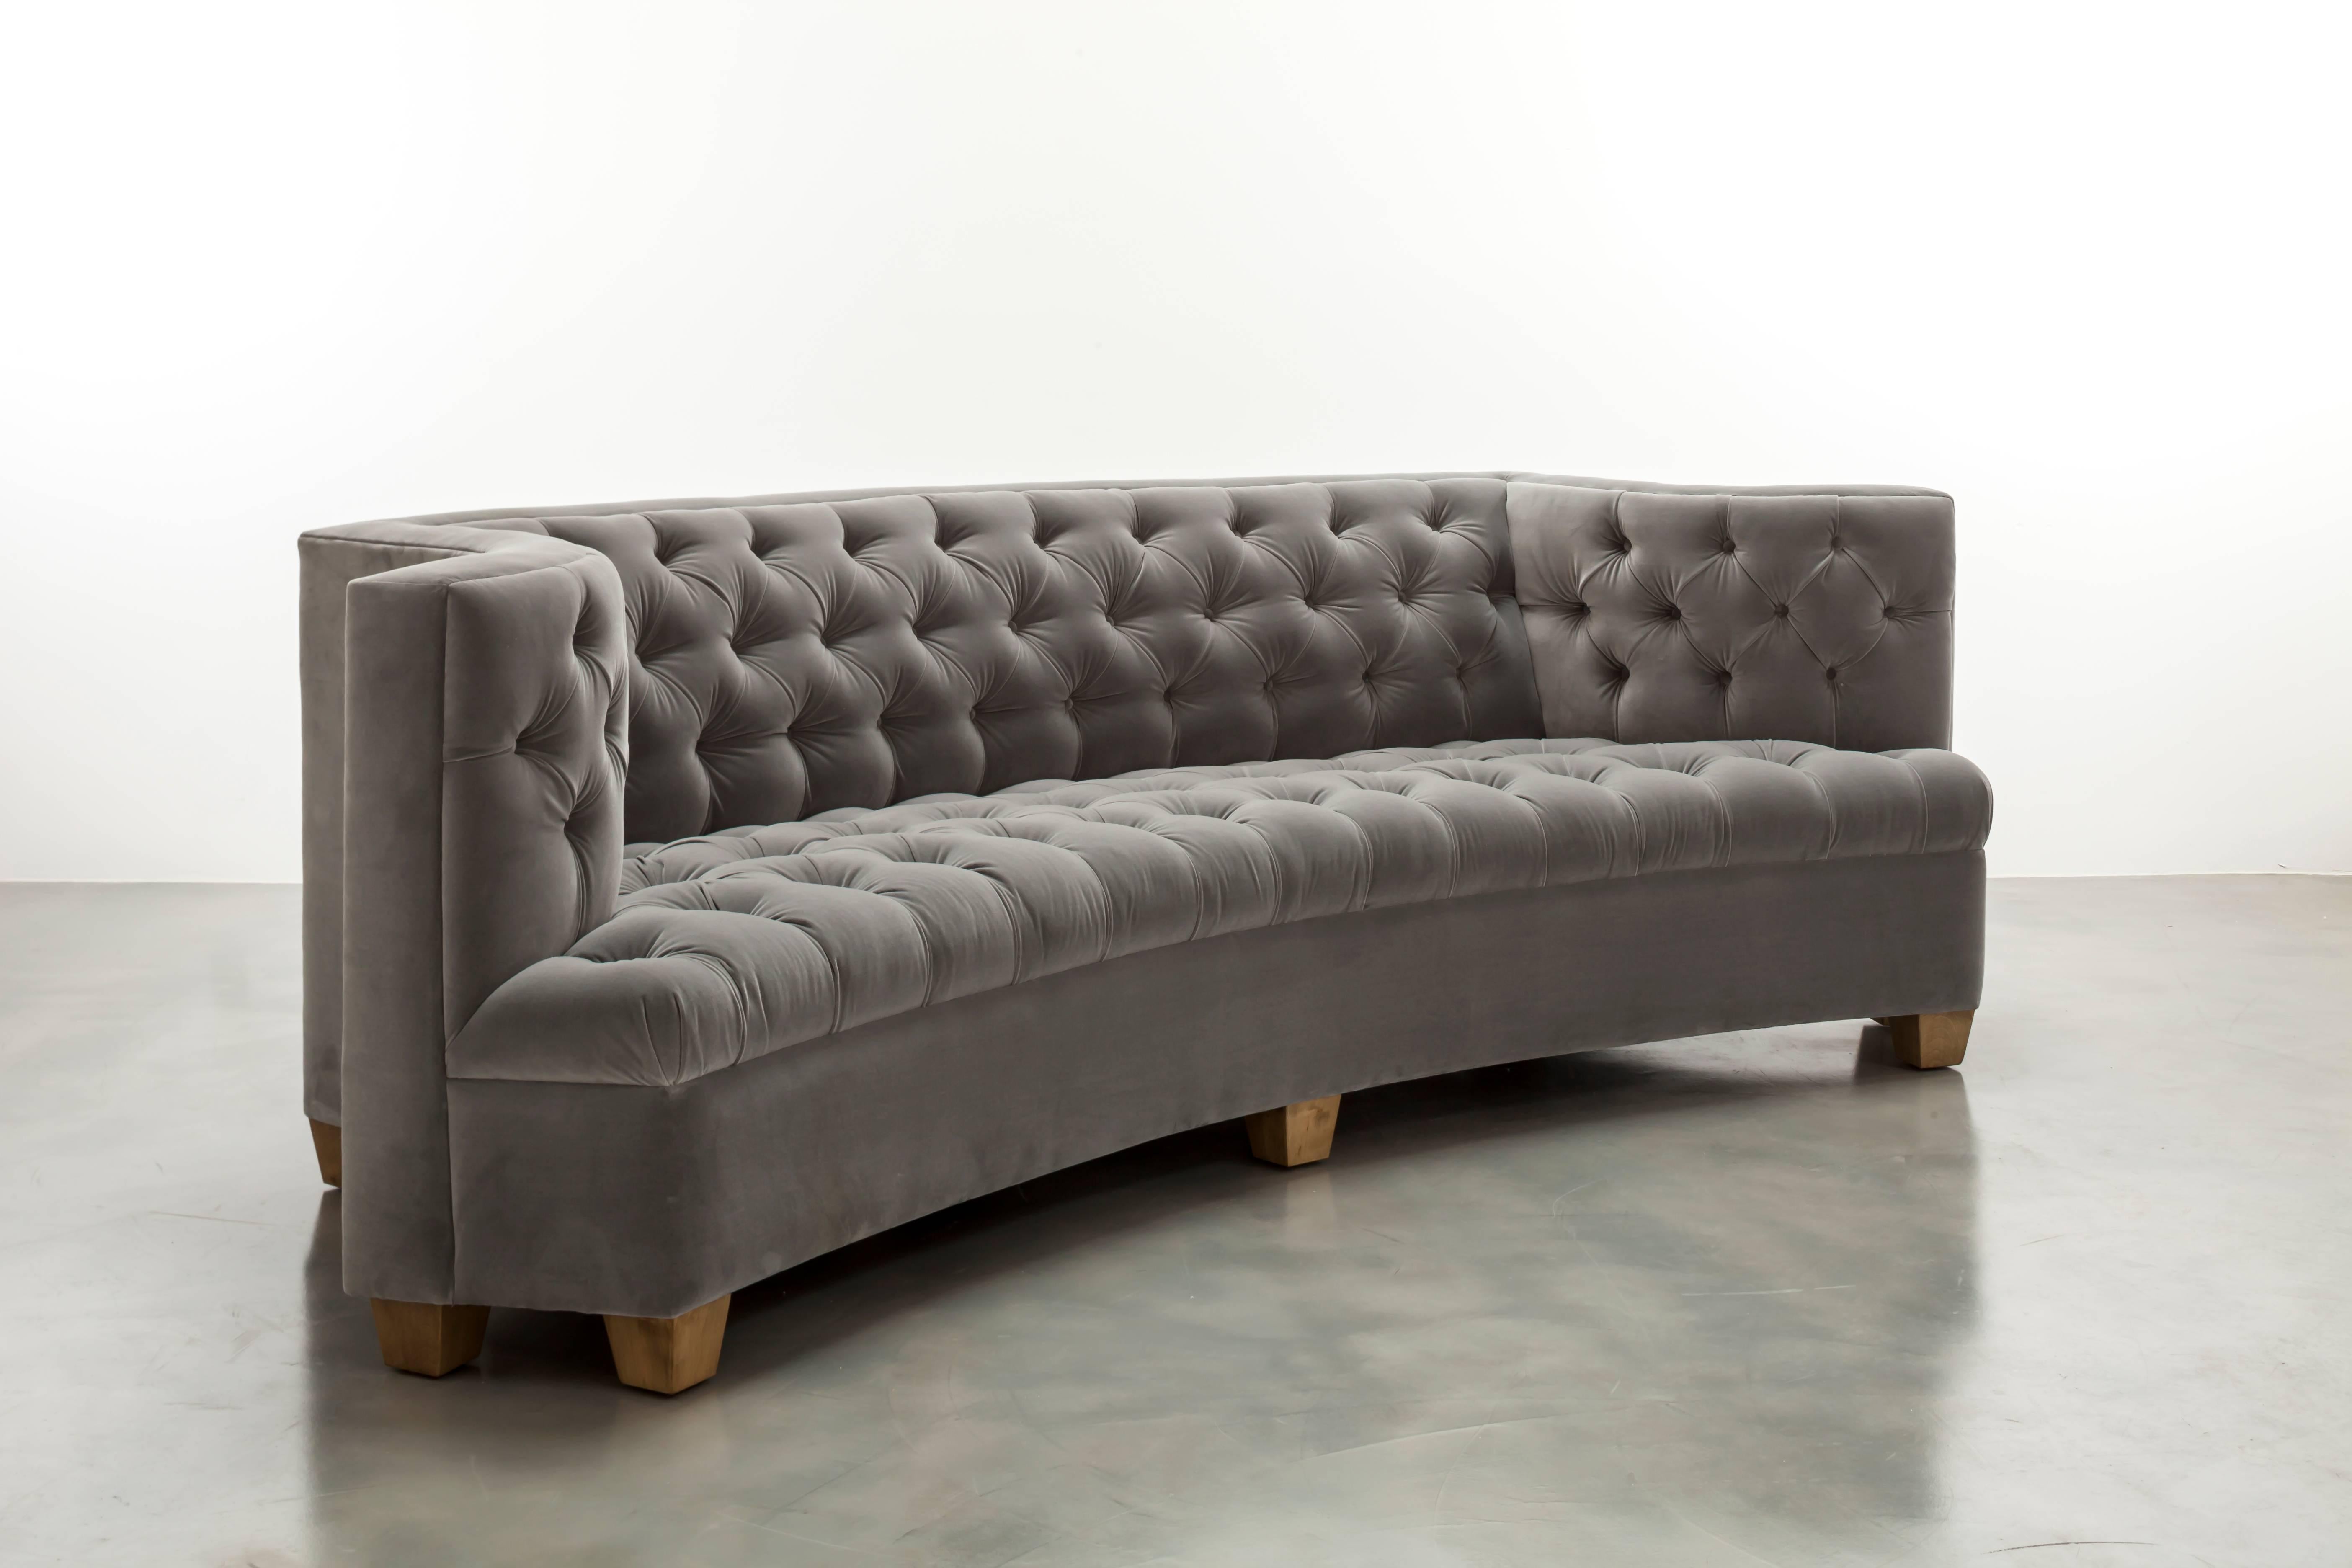 The Colette Sofa features a modern tufted tightly upholstered frame with winged arm details.  Fully custom and made to order in California. As shown in Luxury Velvet $9,715.00.  Starting at $8,000.00.